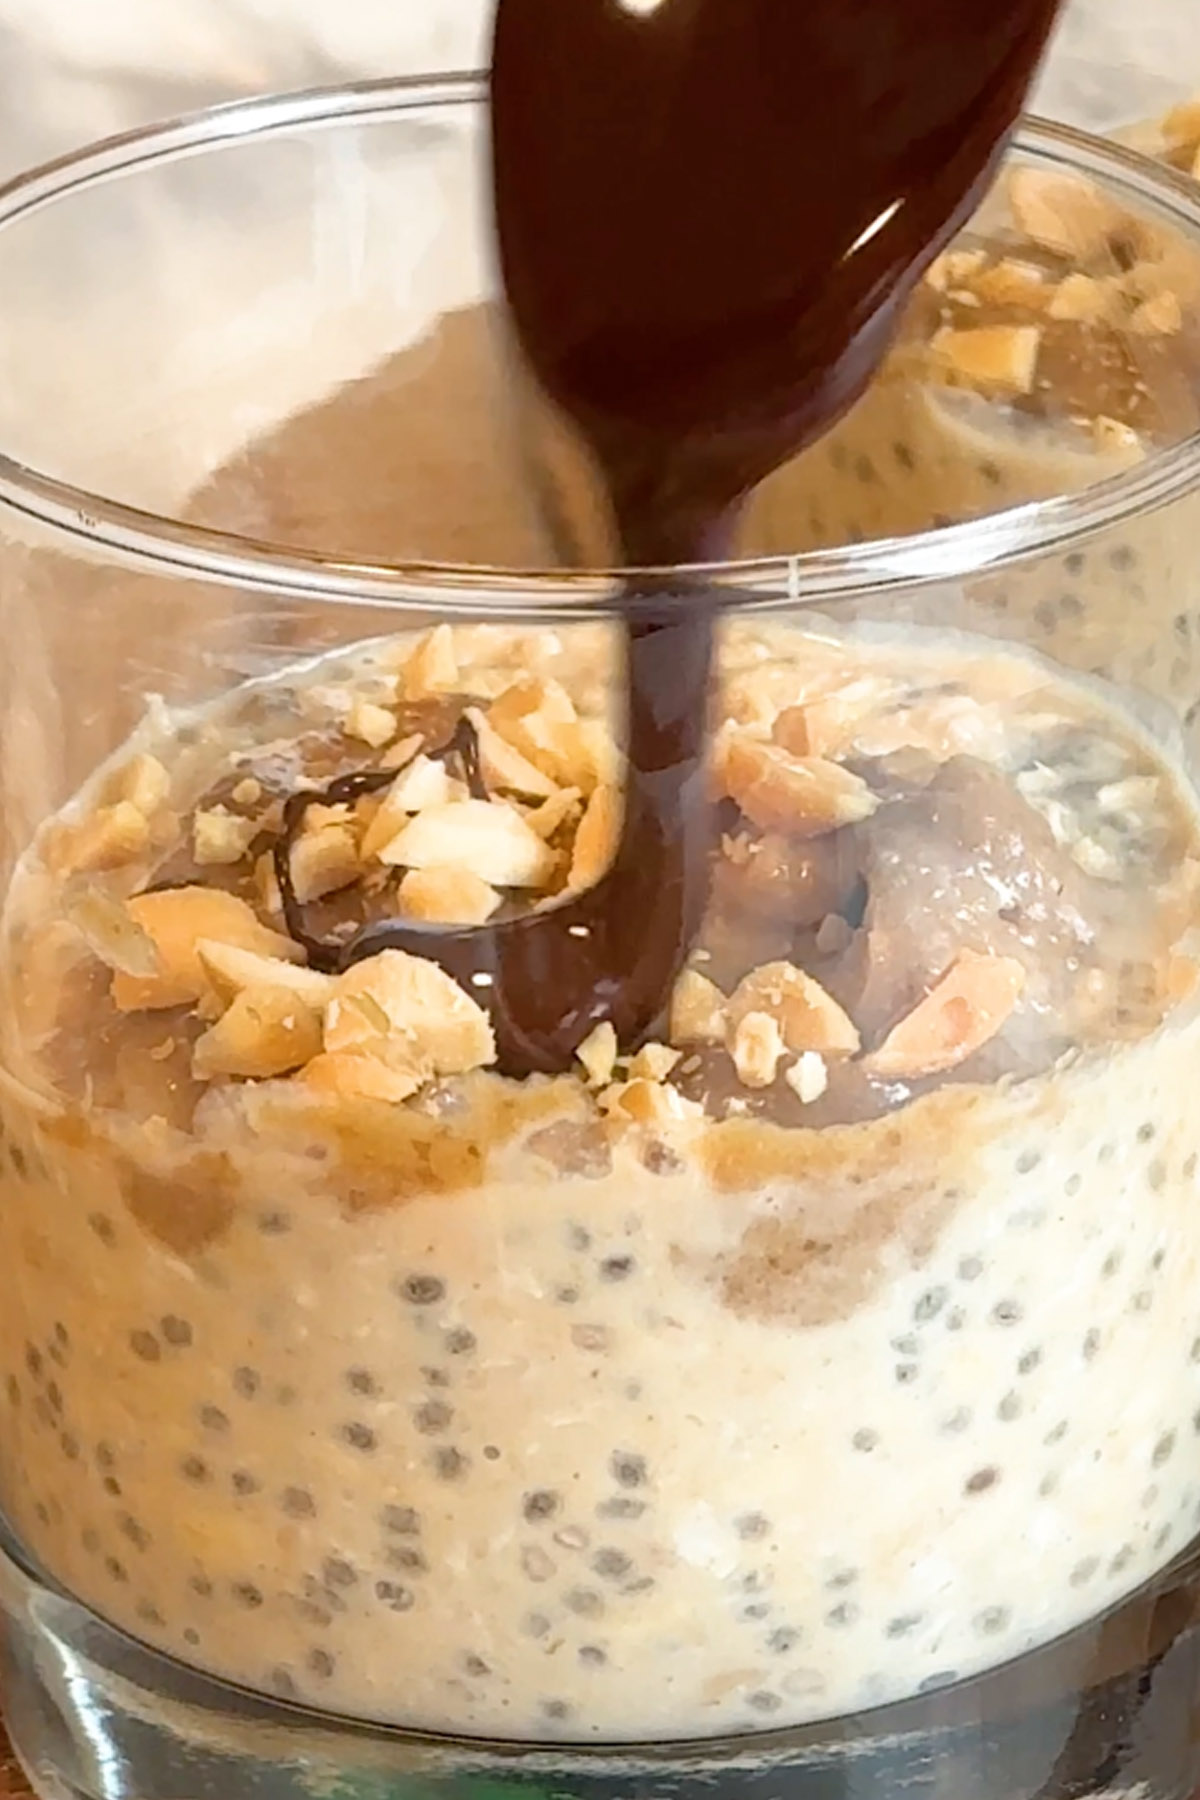 Chocolate is drizzled on top of oats in a glass.